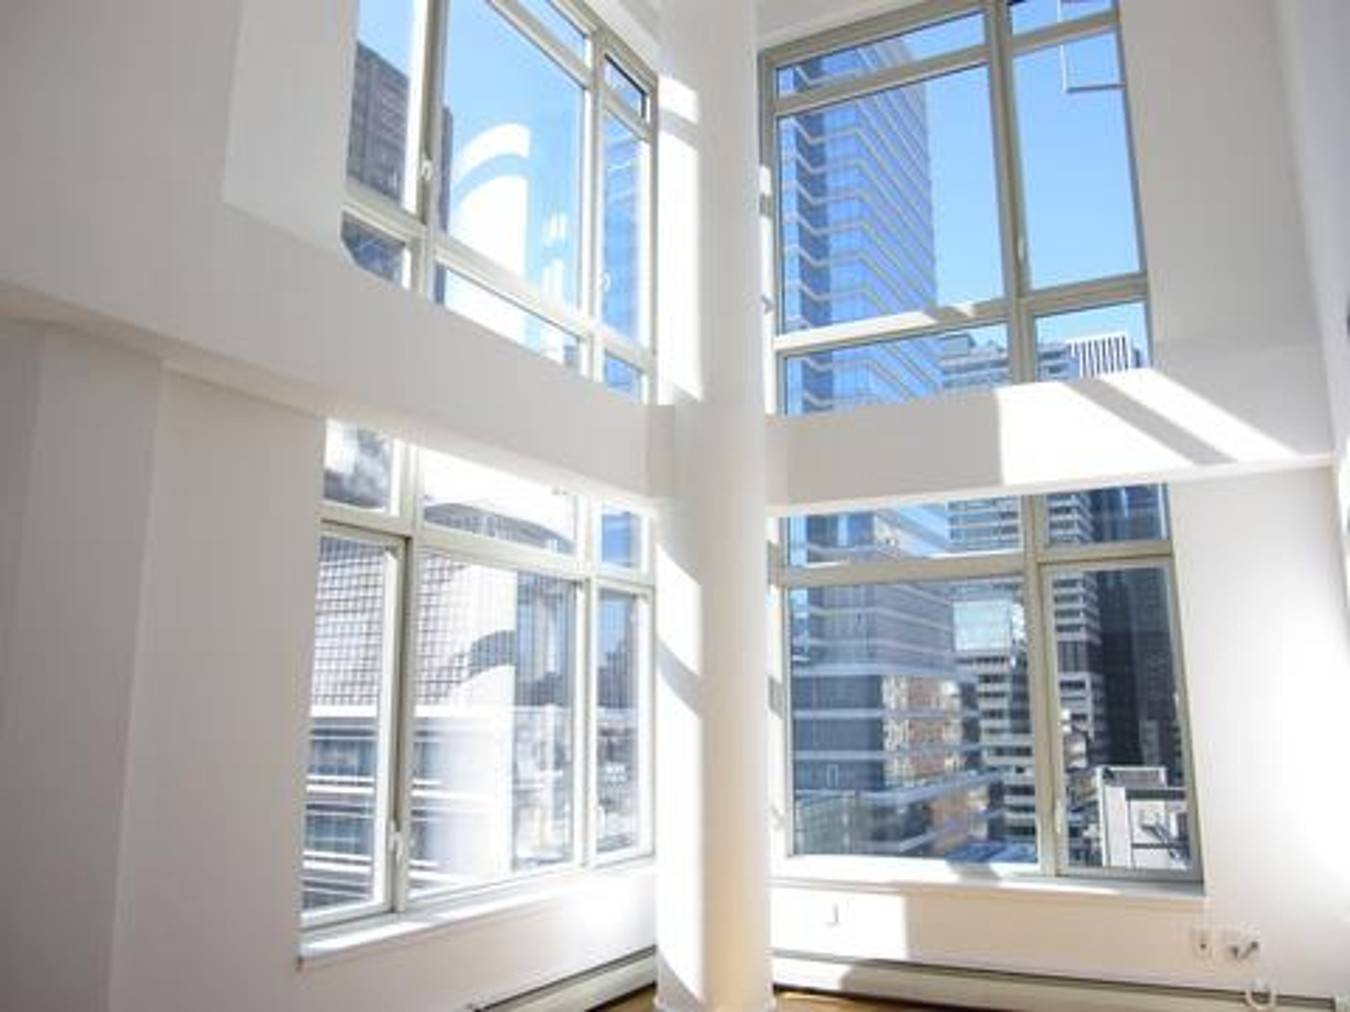 NEW CONSTRUCTION LUXURY 2BR/3BA PENTHOUSE with PRIVATE TERRACE